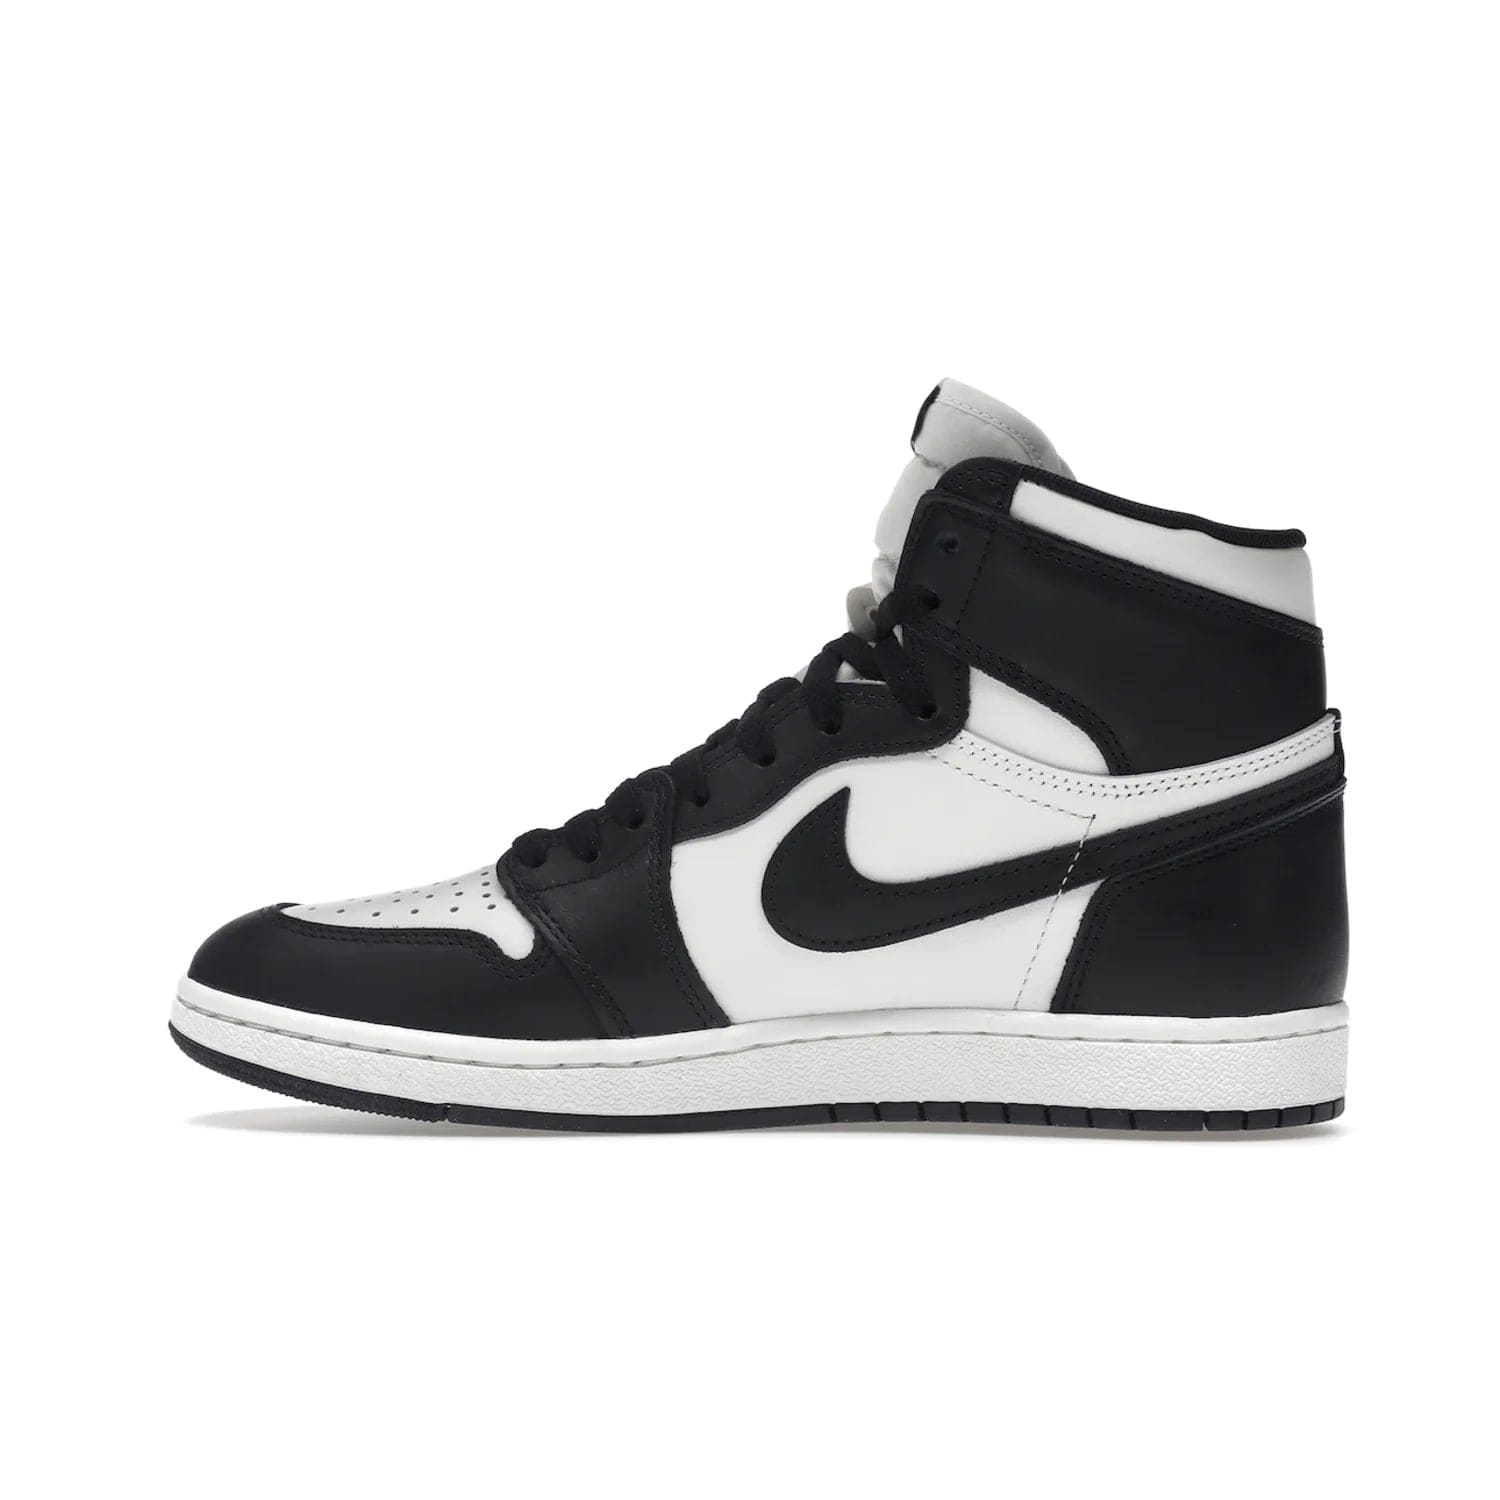 Jordan 1 Retro High 85 Black White (2023) - Image 20 - Only at www.BallersClubKickz.com - Brand new Jordan 1 Retro High 85 Black White (2023) now available. A classic color scheme of black and white leather uppers with signature Nike Air logo on the tongue. Must-have for any Air Jordan fan. Available February 15, 2023.